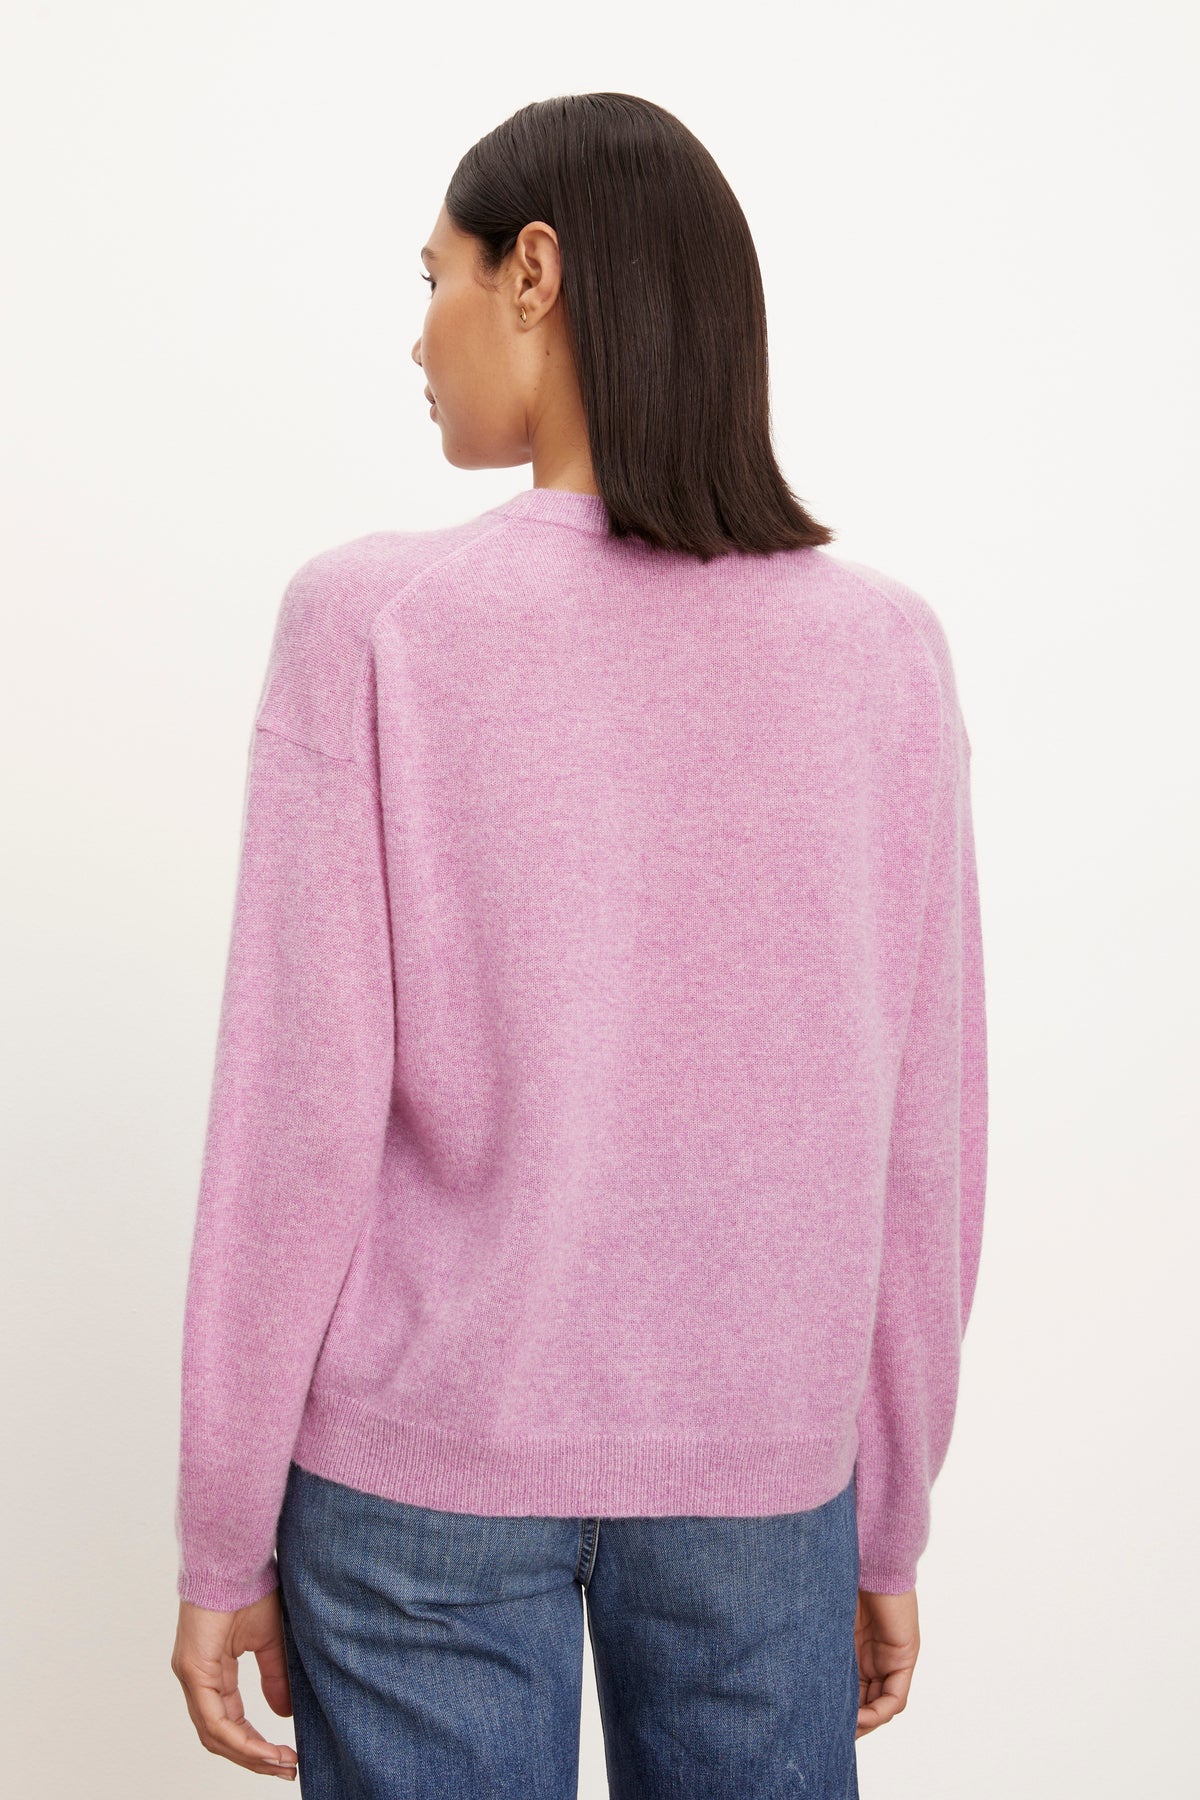 The relaxed back view of a woman wearing a Velvet by Graham & Spencer BRYNNE CASHMERE CREW NECK SWEATER.-26883604709569